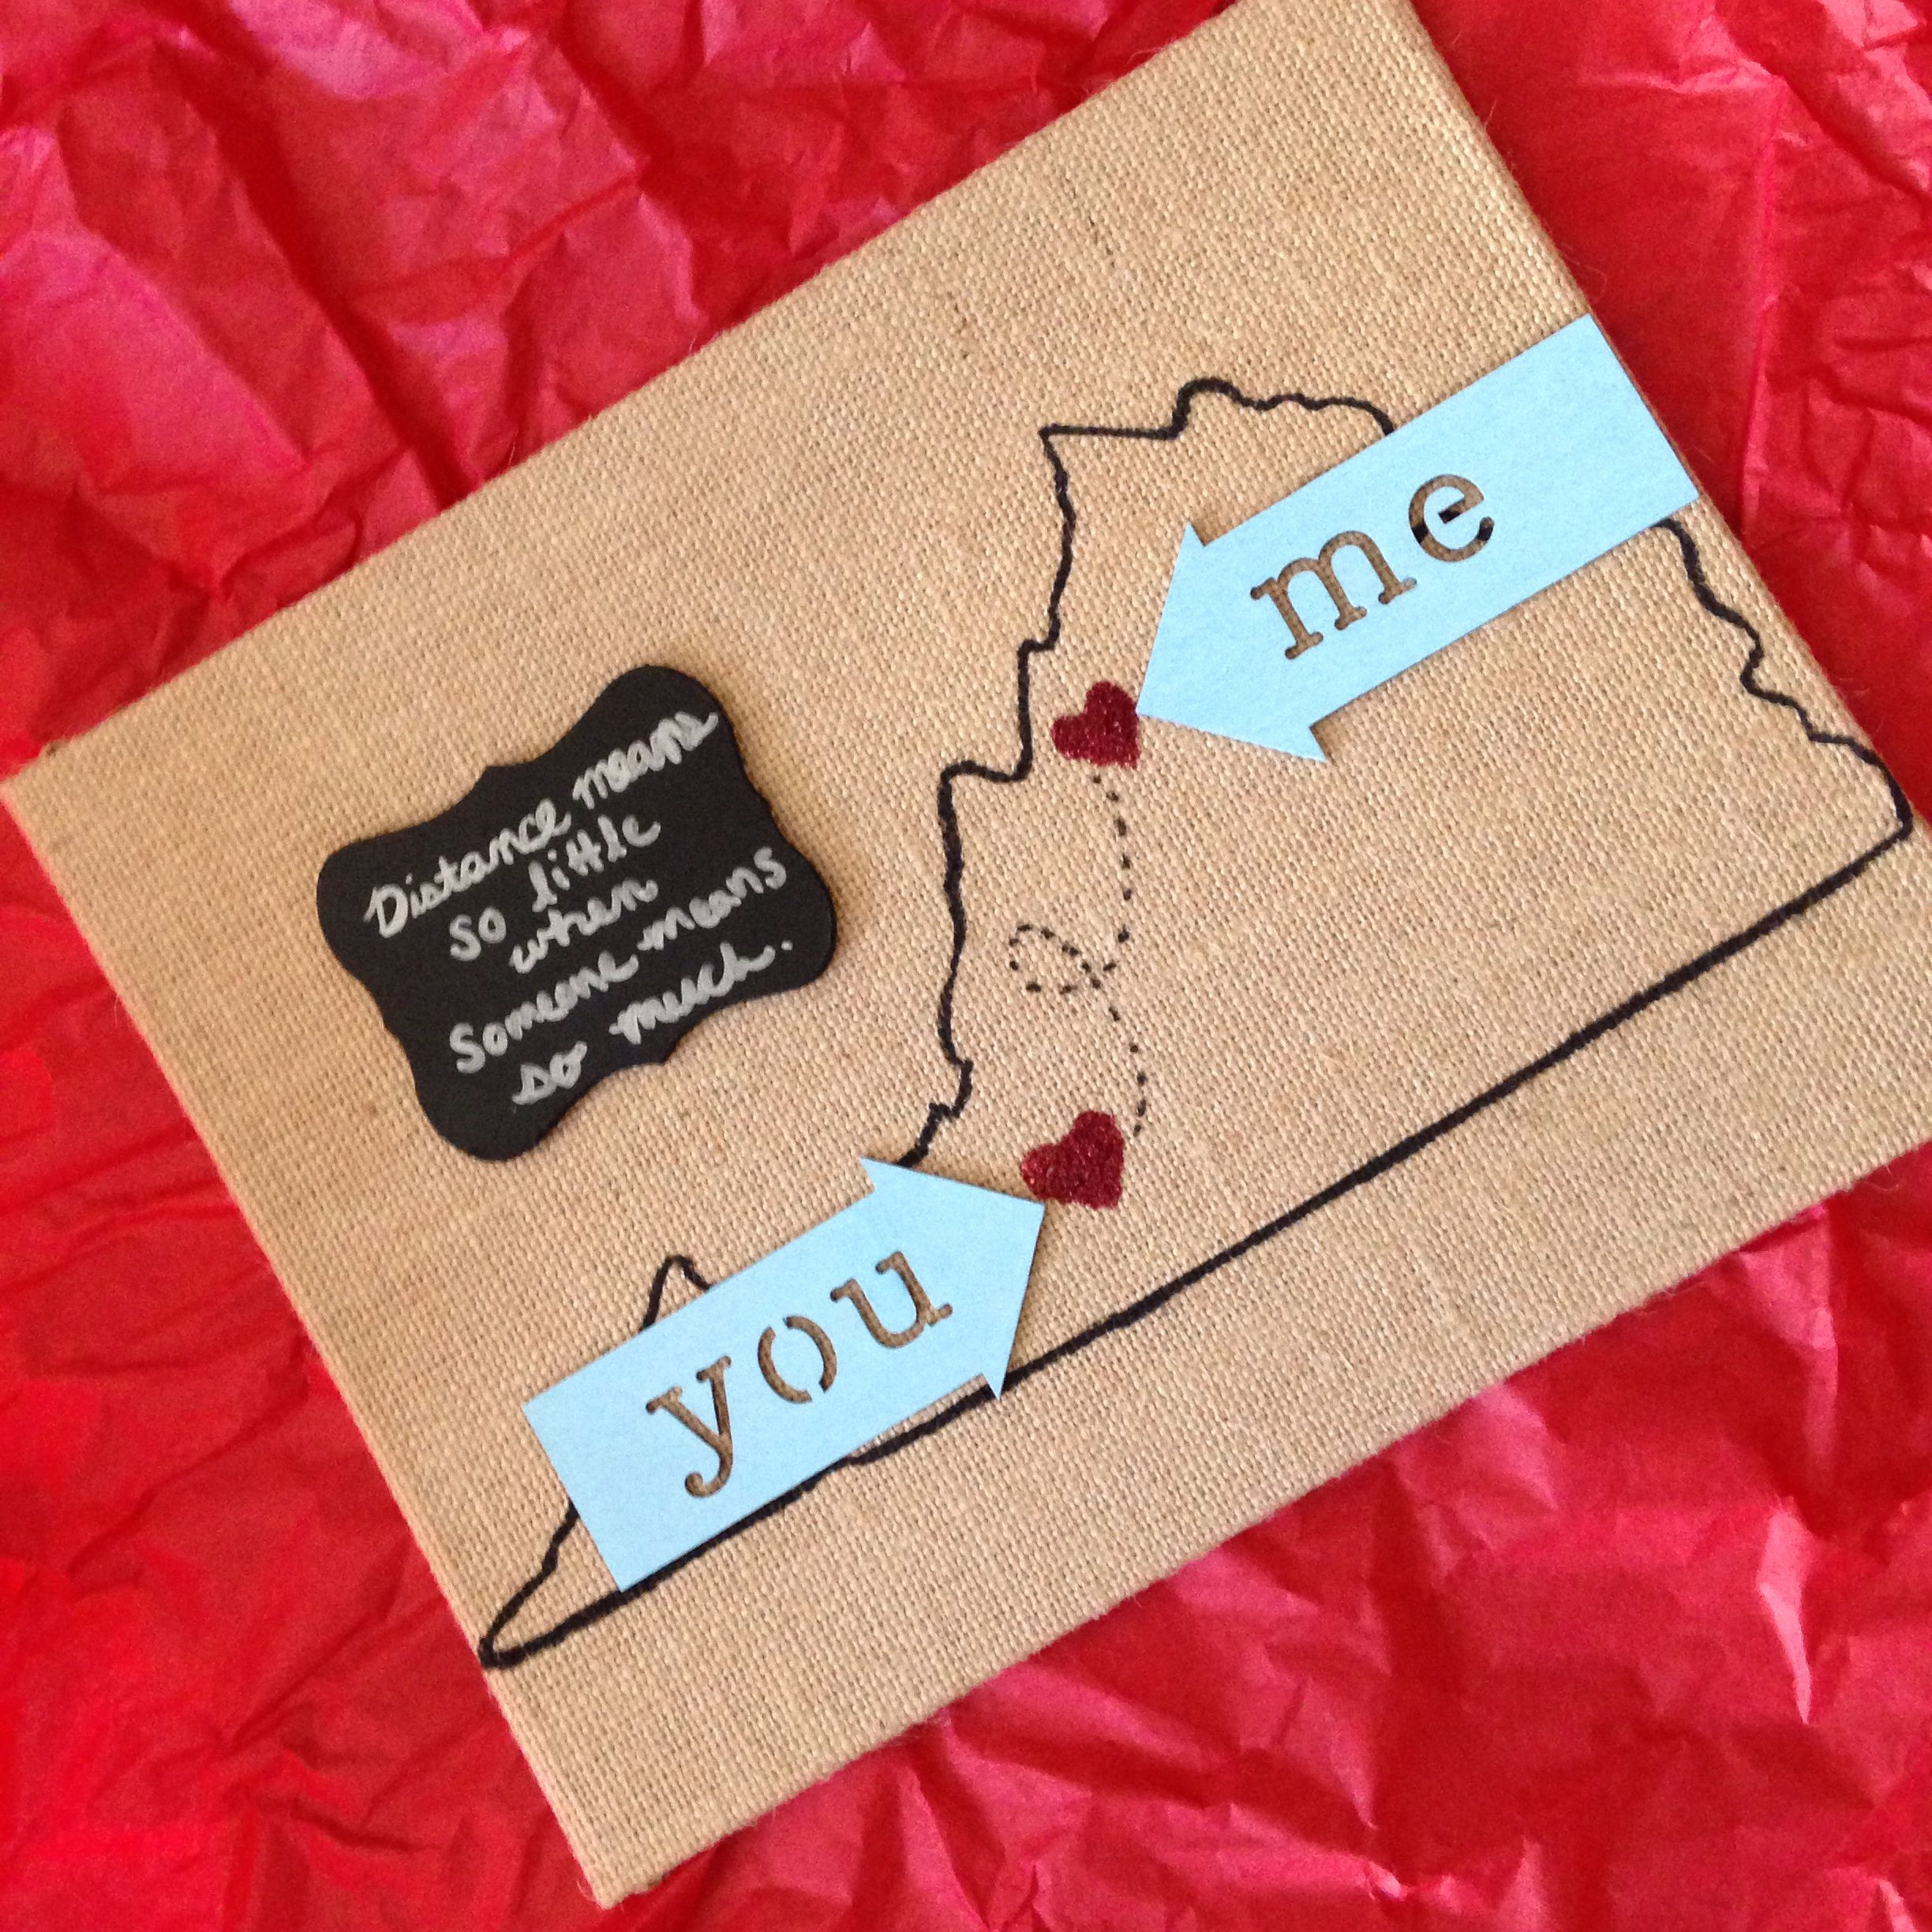 Long Distance Birthday Gift Ideas
 I m in a long distance relationship & I made this for my